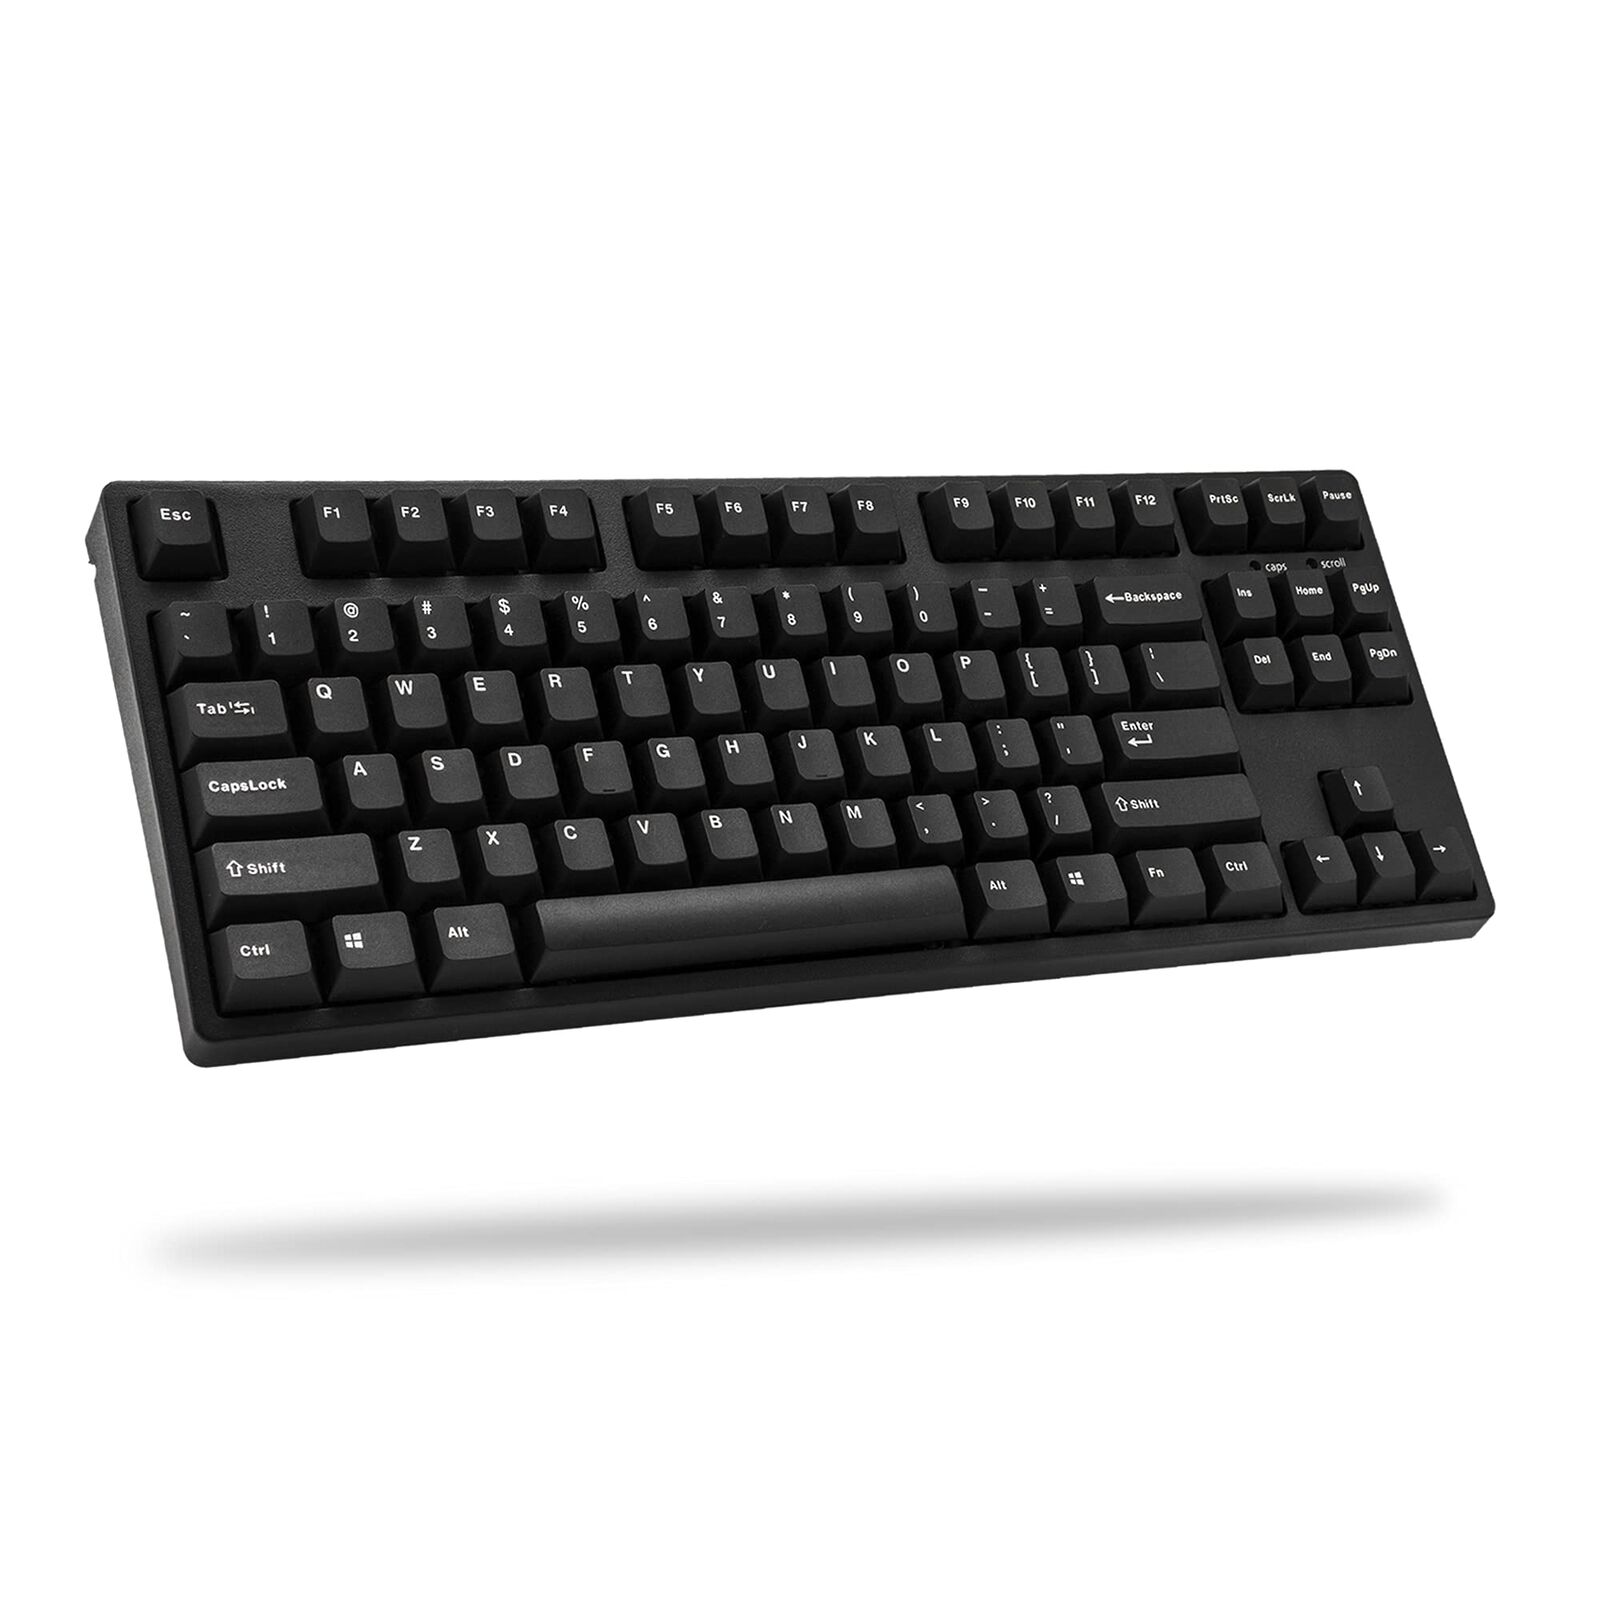 CD87 V2 Ergonomic Mechanical Keyboard with Cherry MX Clear Switch for Windows...